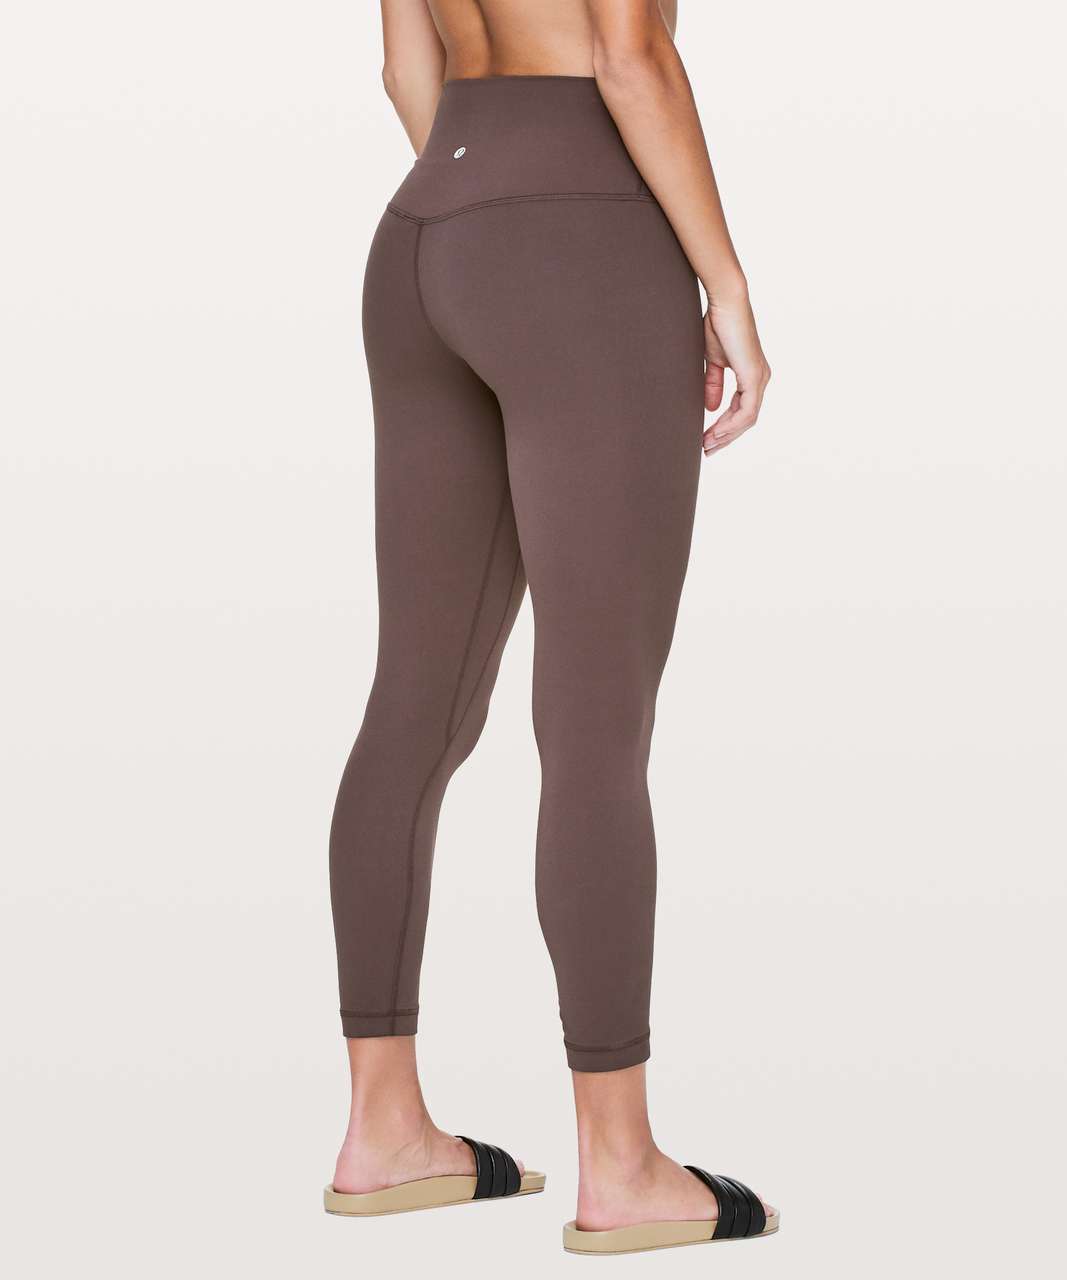 Track lululemon Align™ High-Rise Pant with Pockets 25 - Gradiate Geo